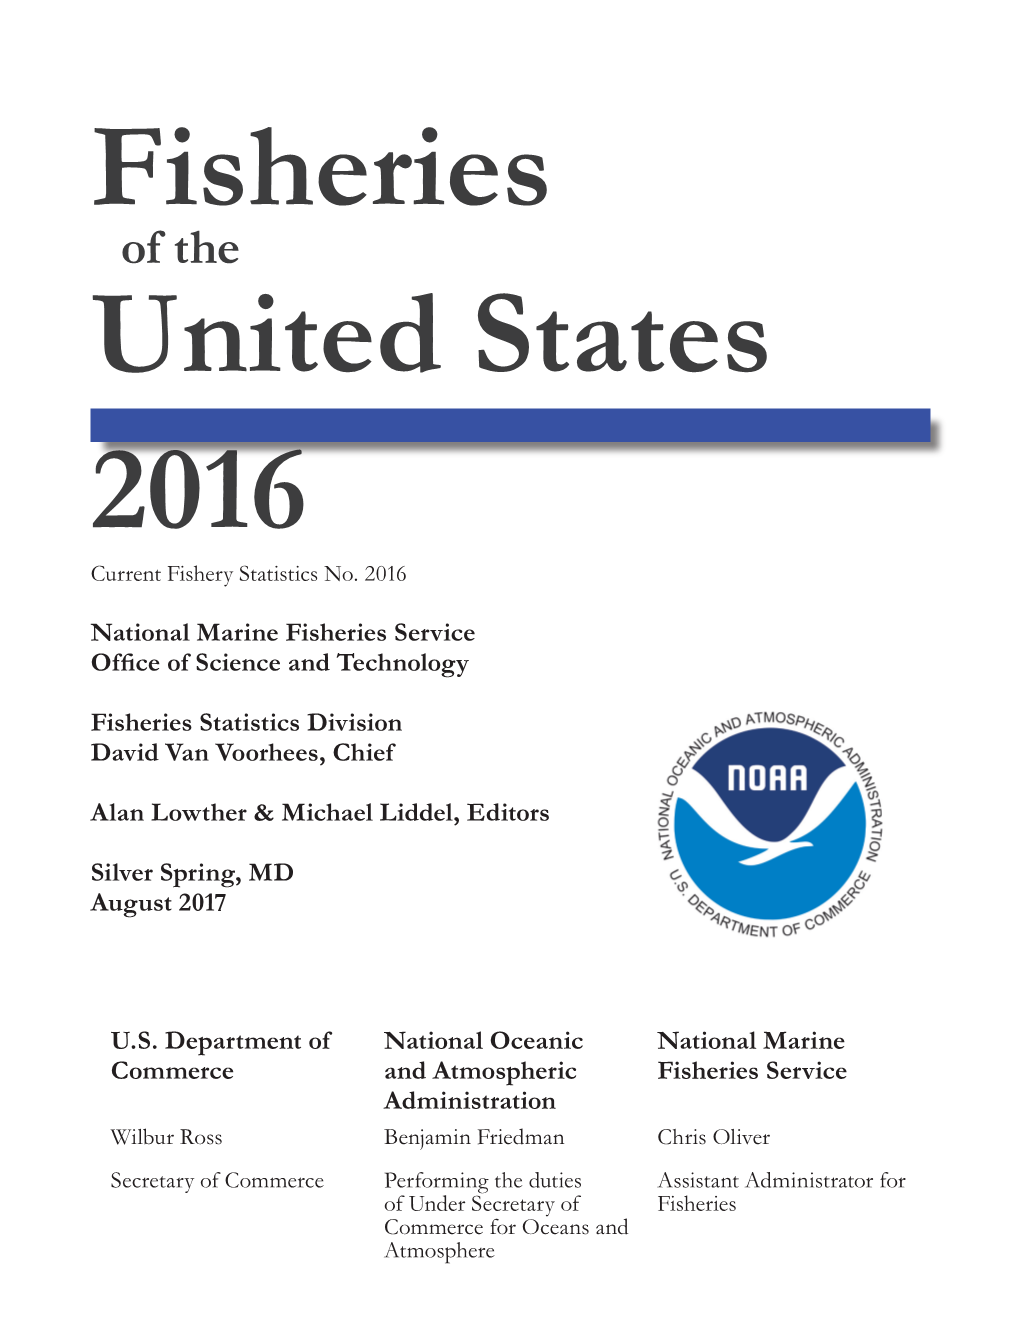 Fisheries of the United States, 2016